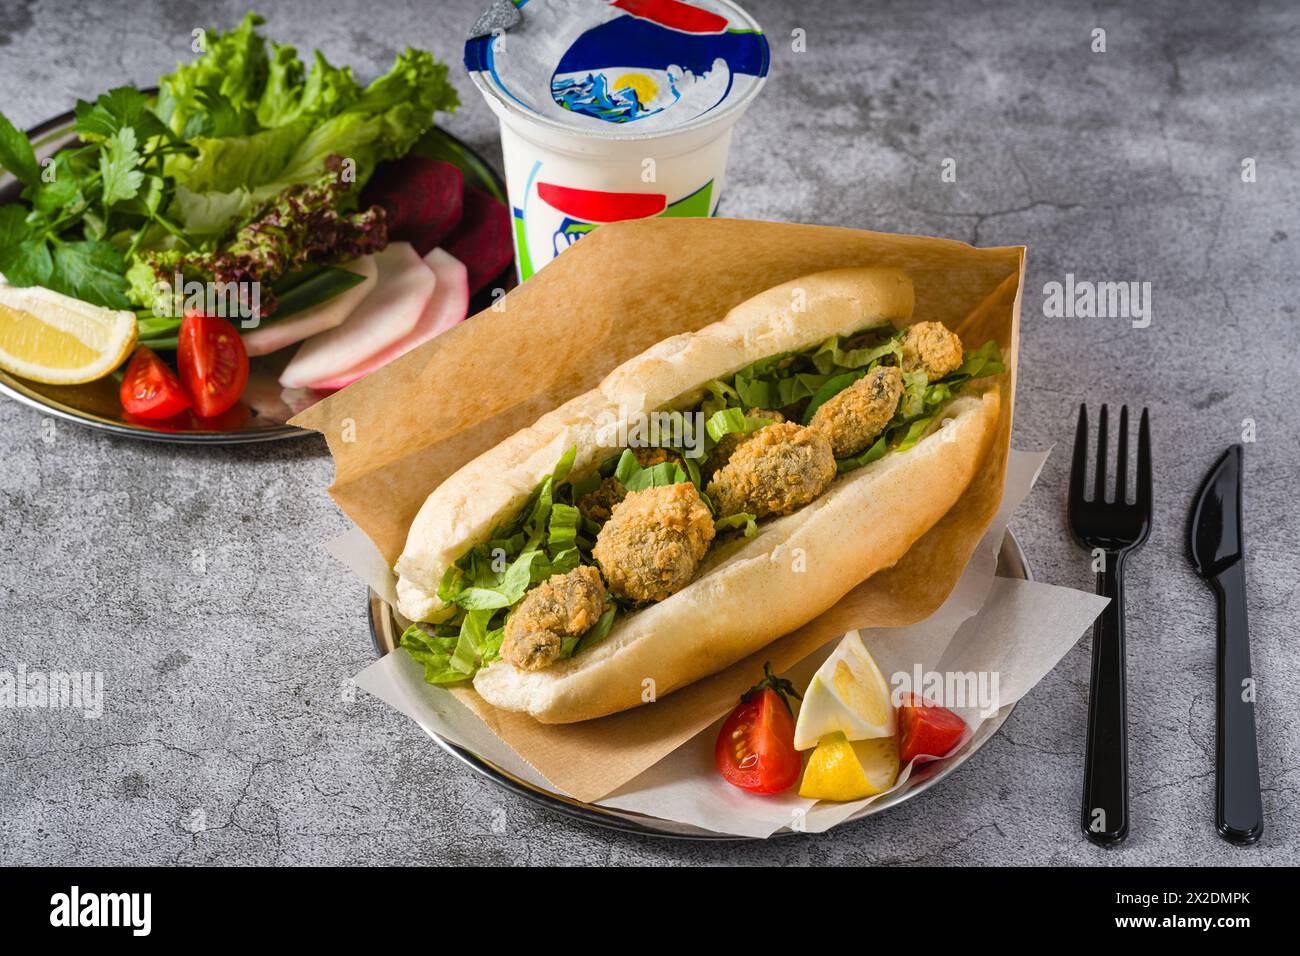 Deep fried mussels in bread and with greens on the side. Turkish name Midye Tava Stock Photo